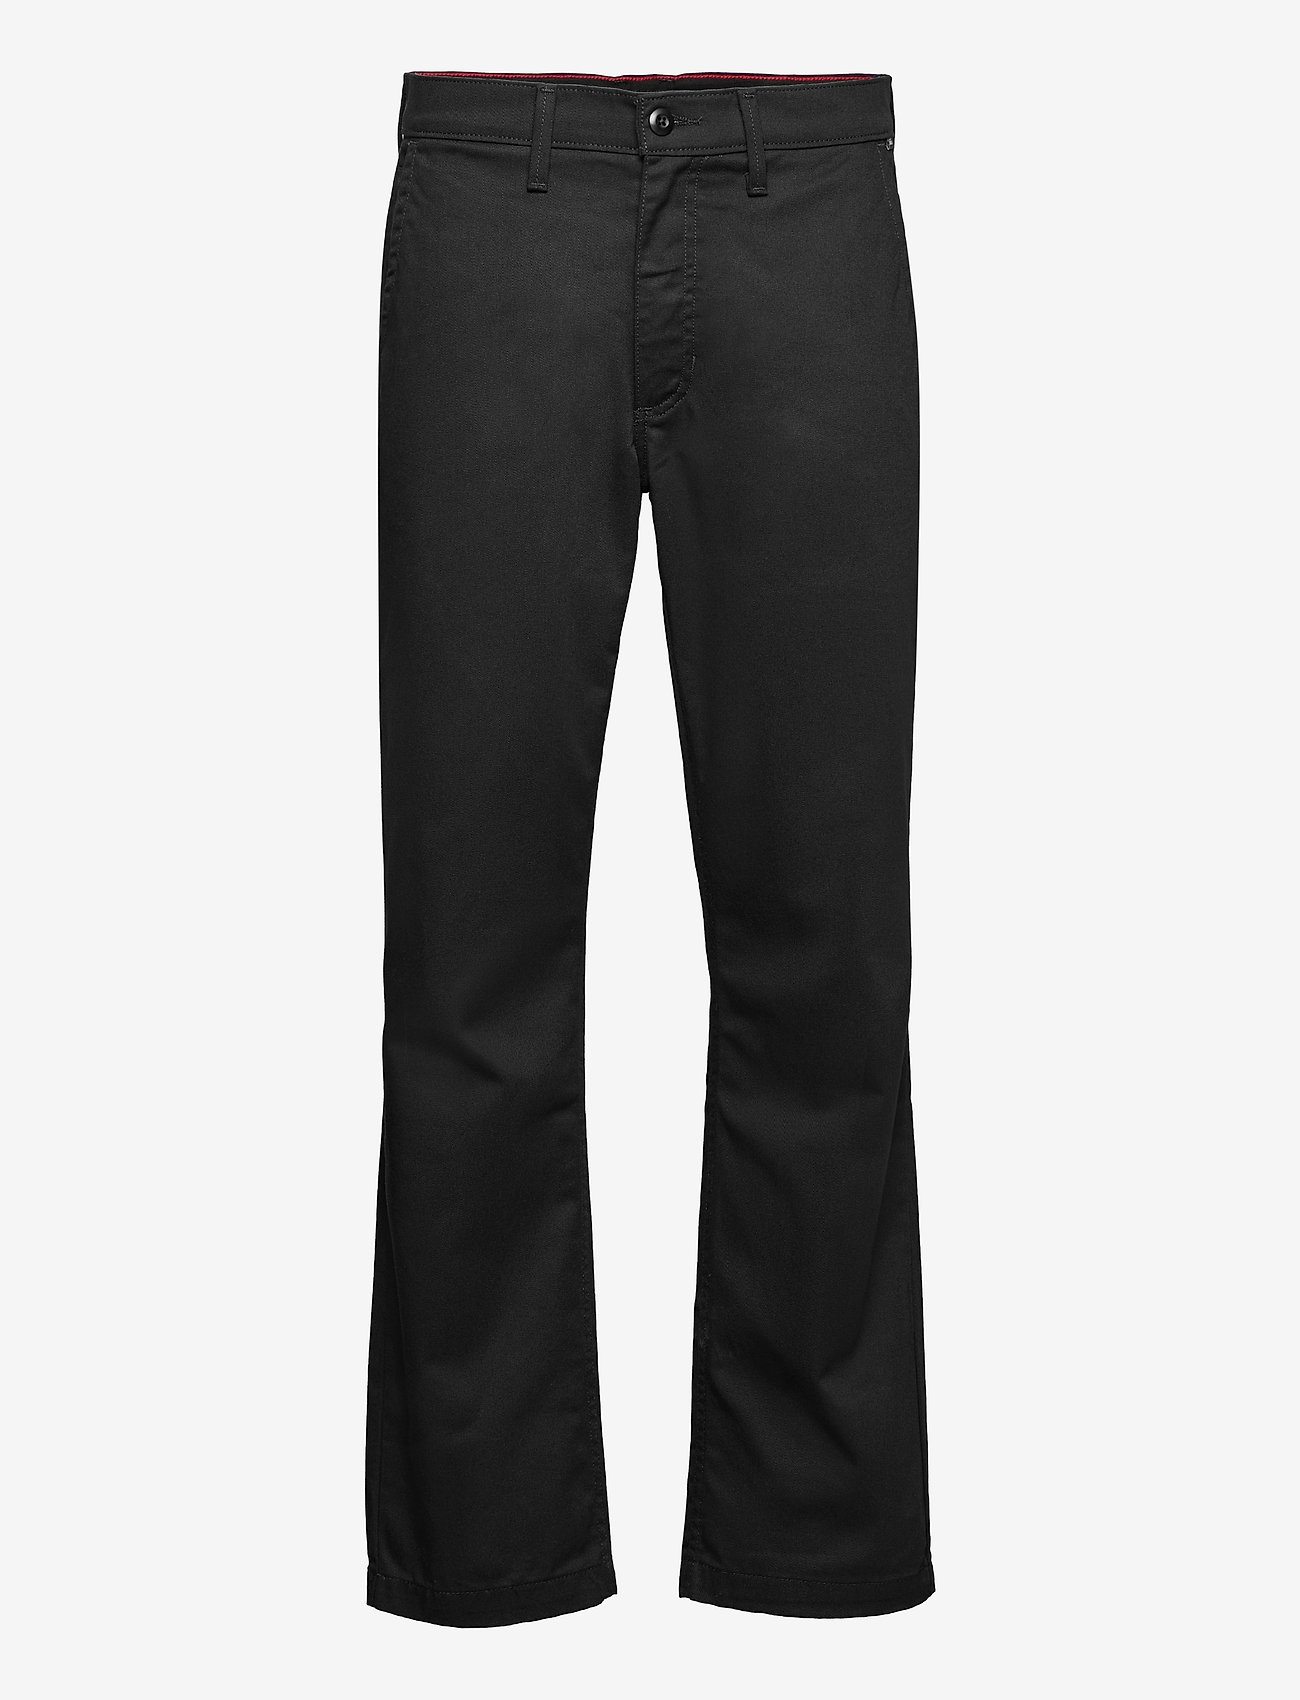 VANS - MN AUTHENTIC CHINO RELAXED PANT - sportbyxor - black - 0